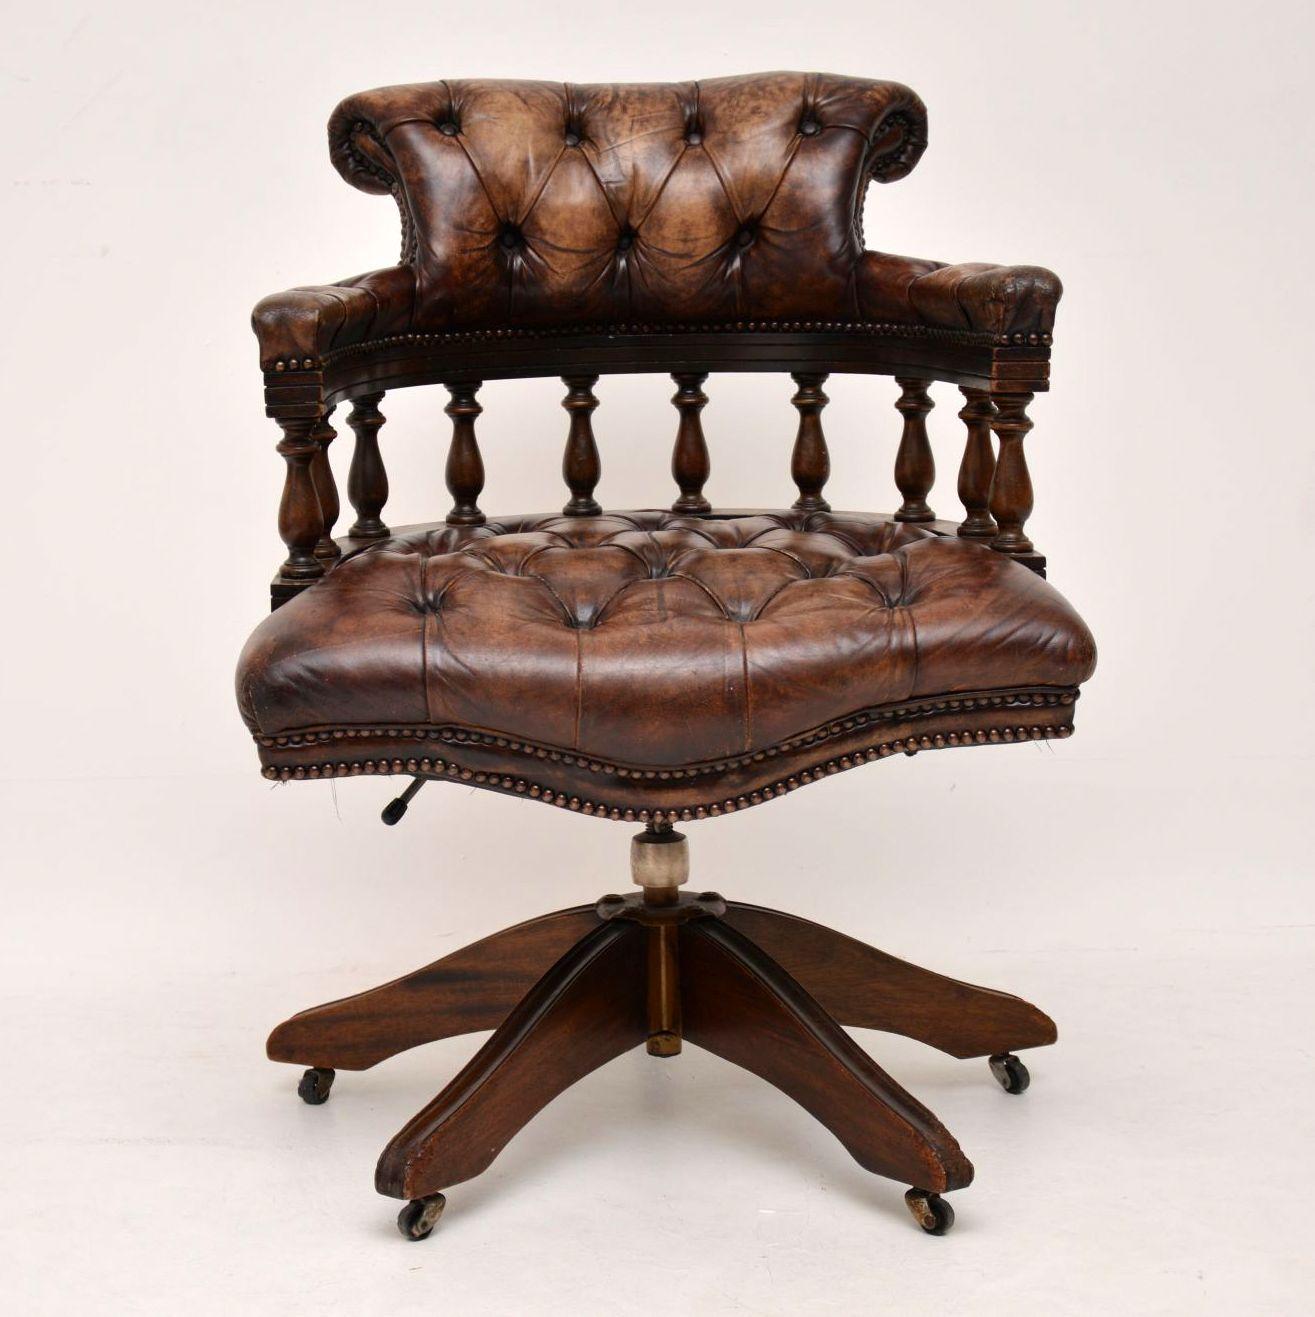 Antique deep buttoned leather mahogany desk chair in good original condition & full of character. The leather has a fabulous original look & a wonderful color, with natural fading & distressing. This desk chair is very comfortable too because of its